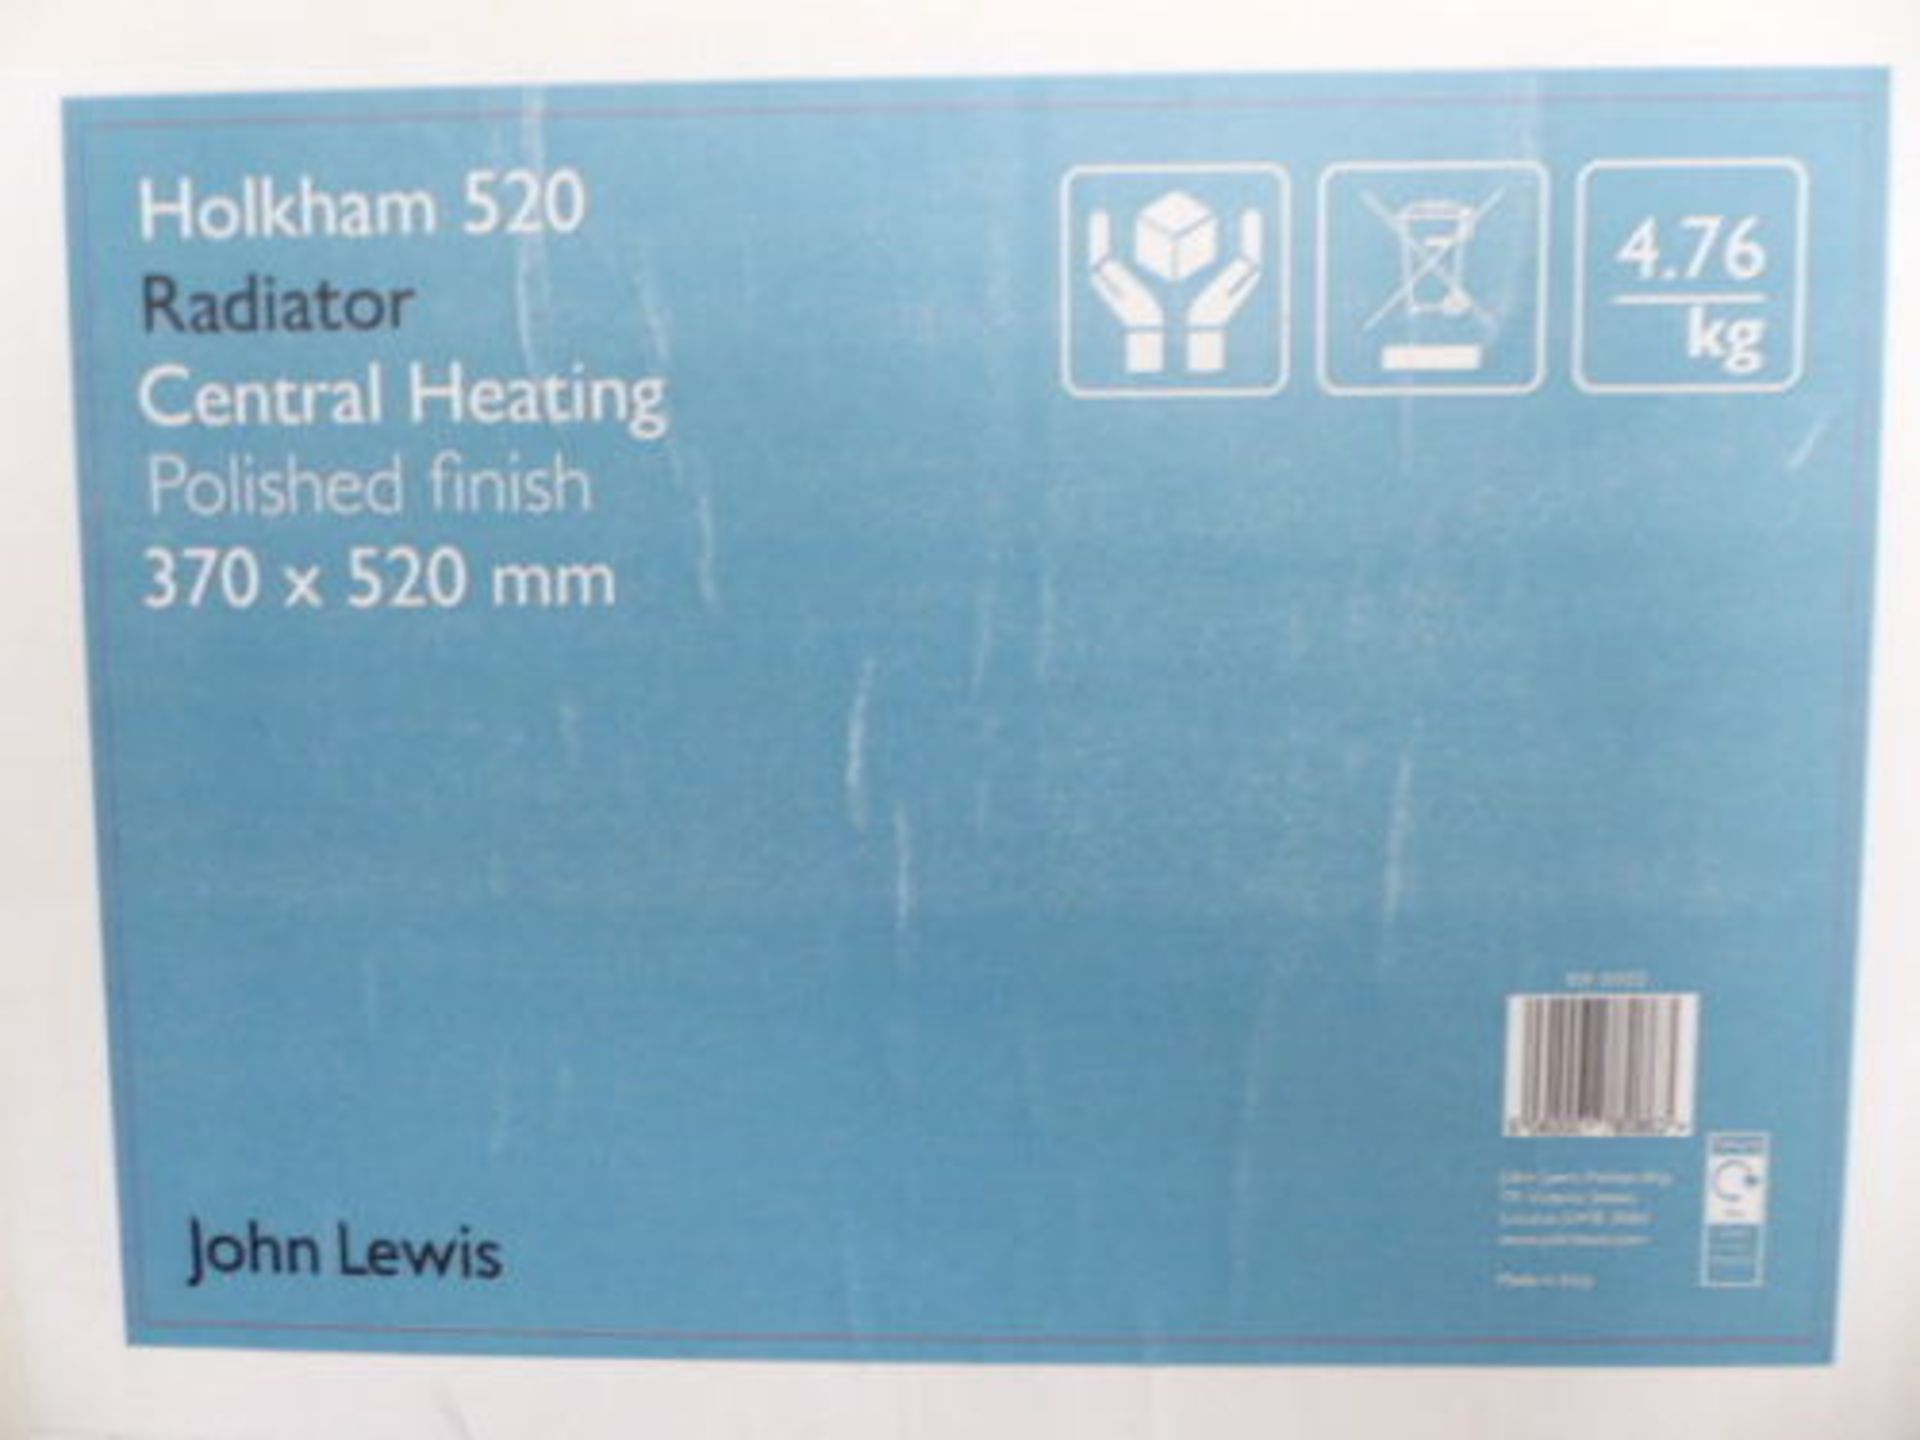 John Lewis Holkham Central Heated Towel Rail & Valves, from the Wall 37cm x 52cm (R8 - 9) - Image 2 of 4